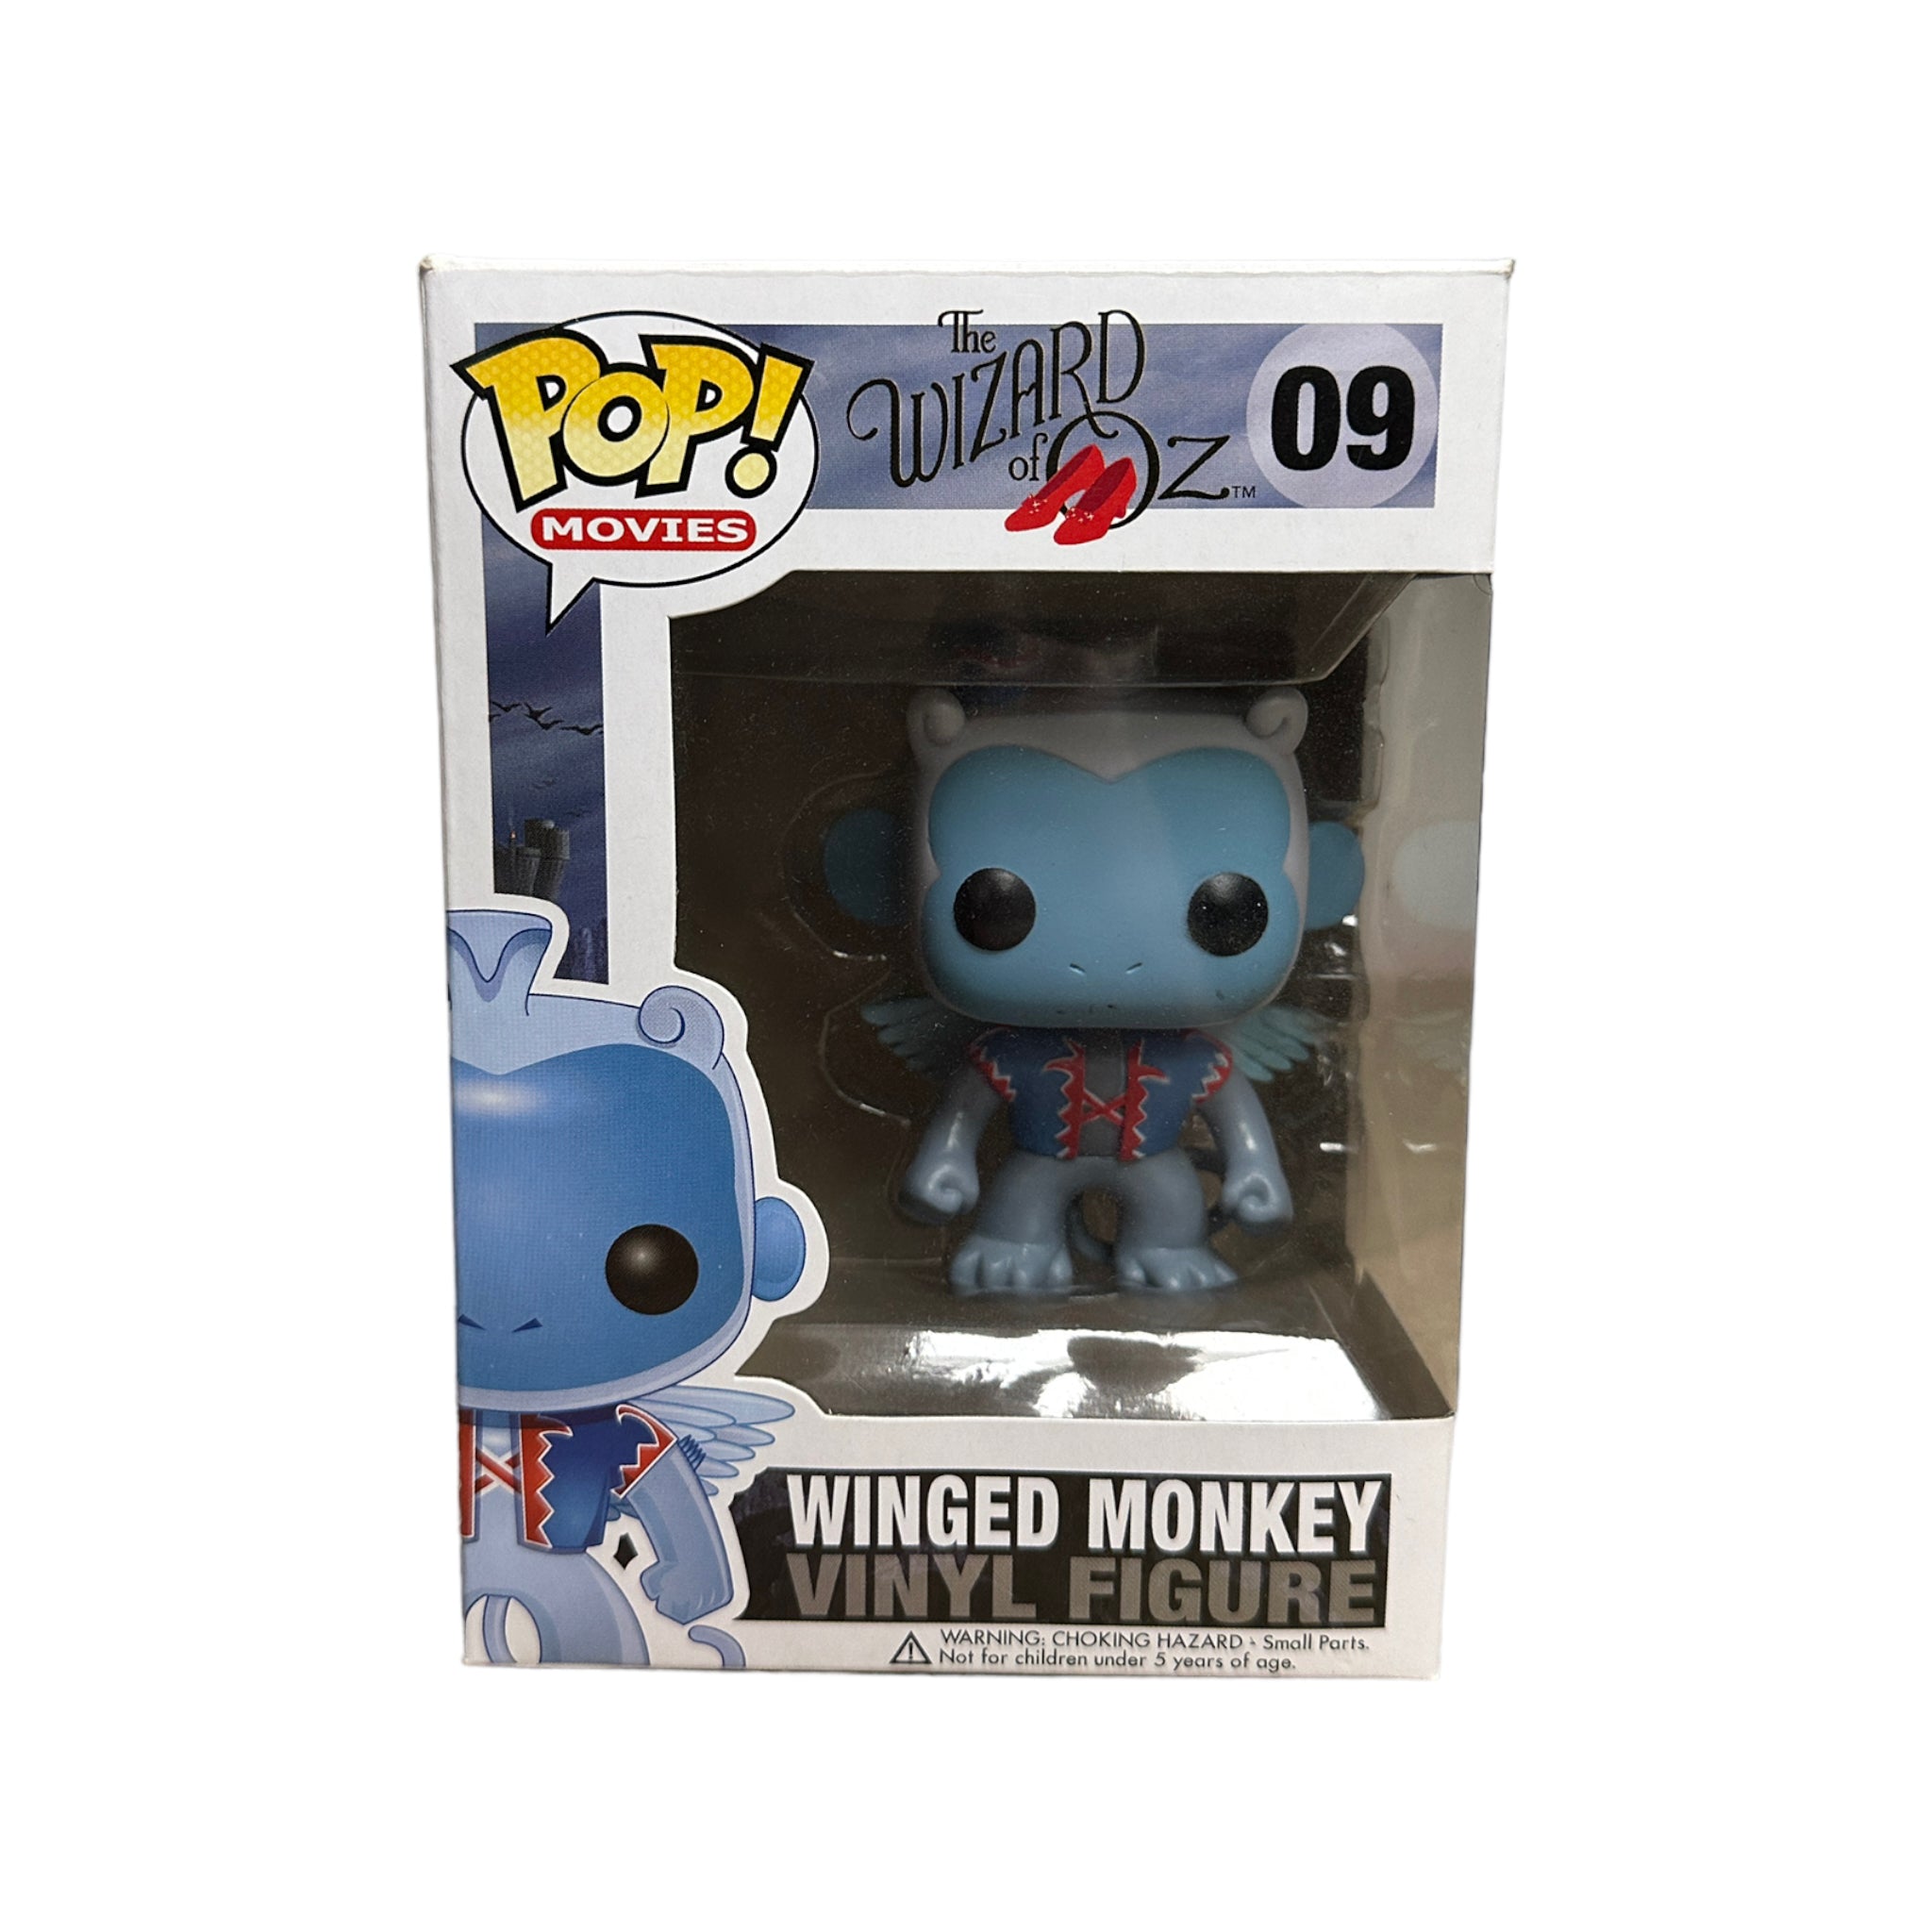 Winged Monkey #09 Funko Pop! - The Wizard of Oz - 2012 Pop! - Condition 6.5/10